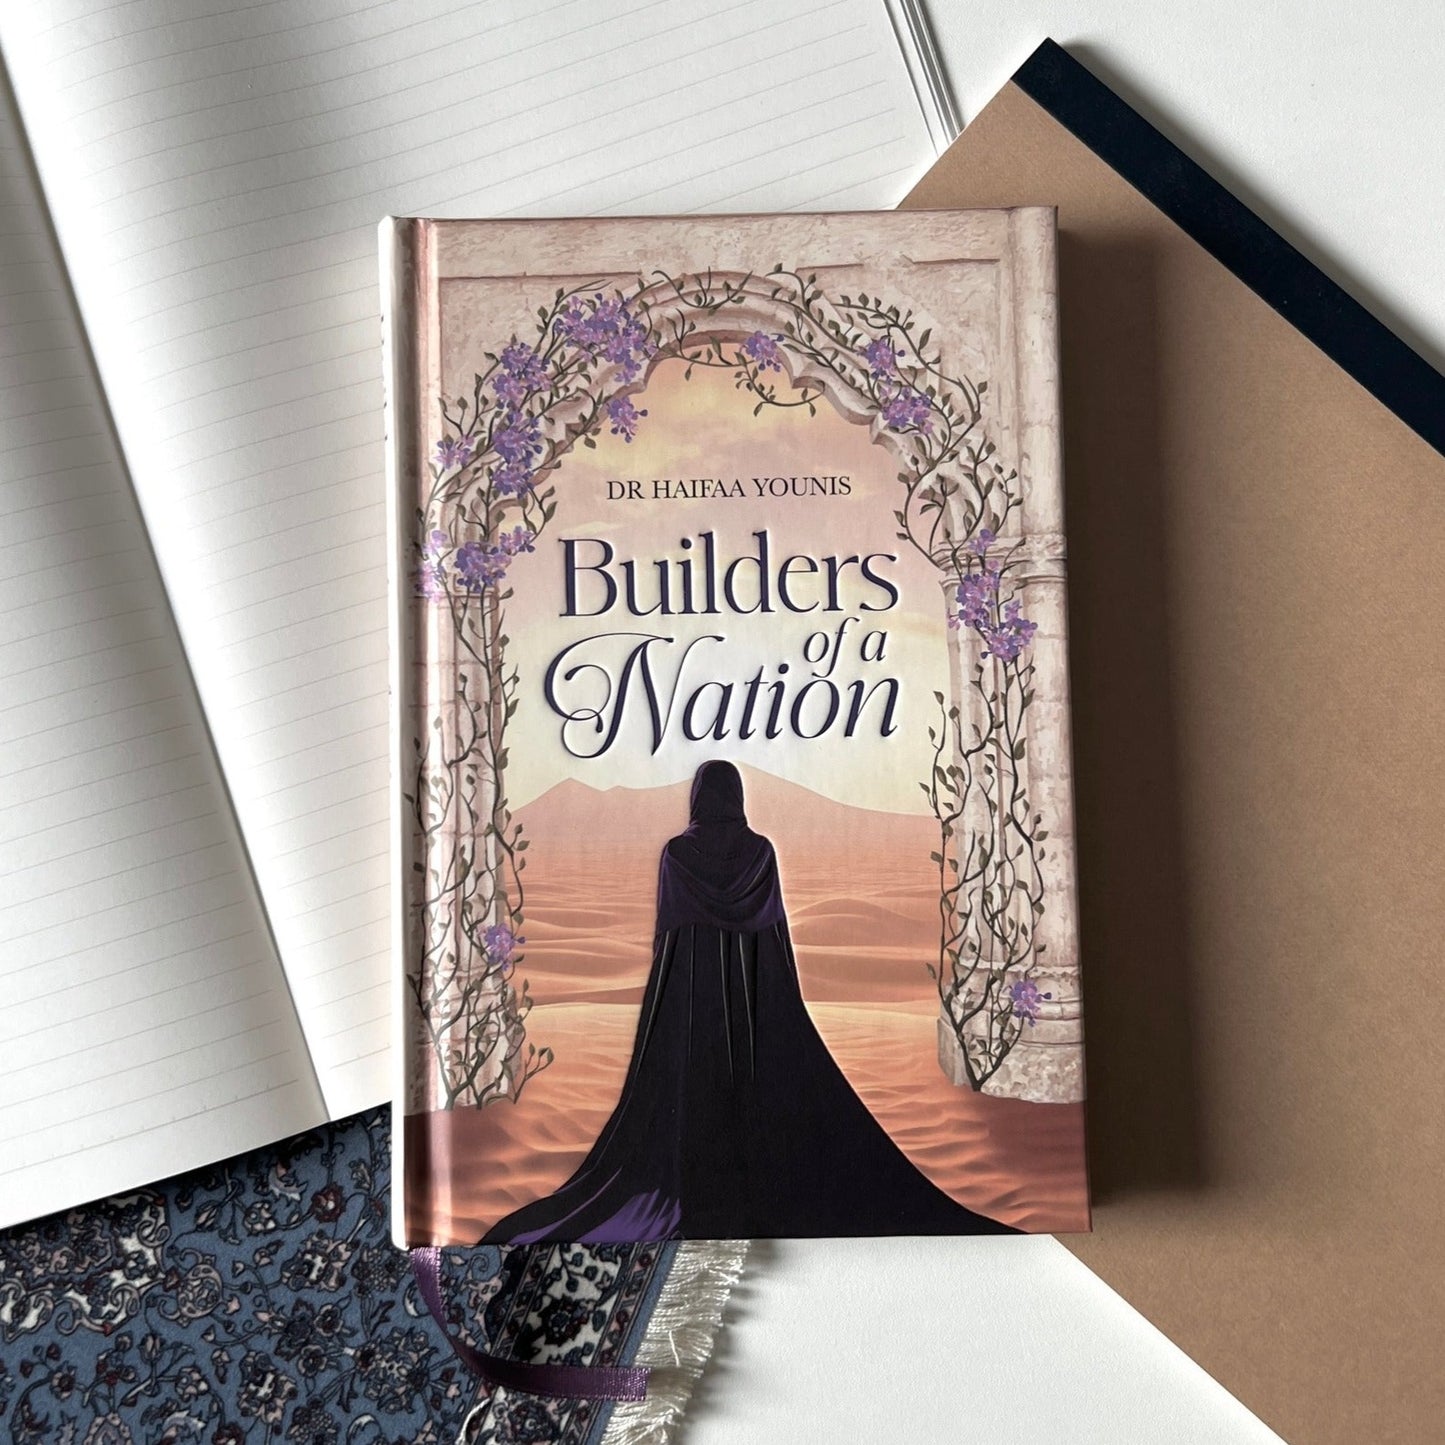 Builders of a Nation - by Haifaa Younis